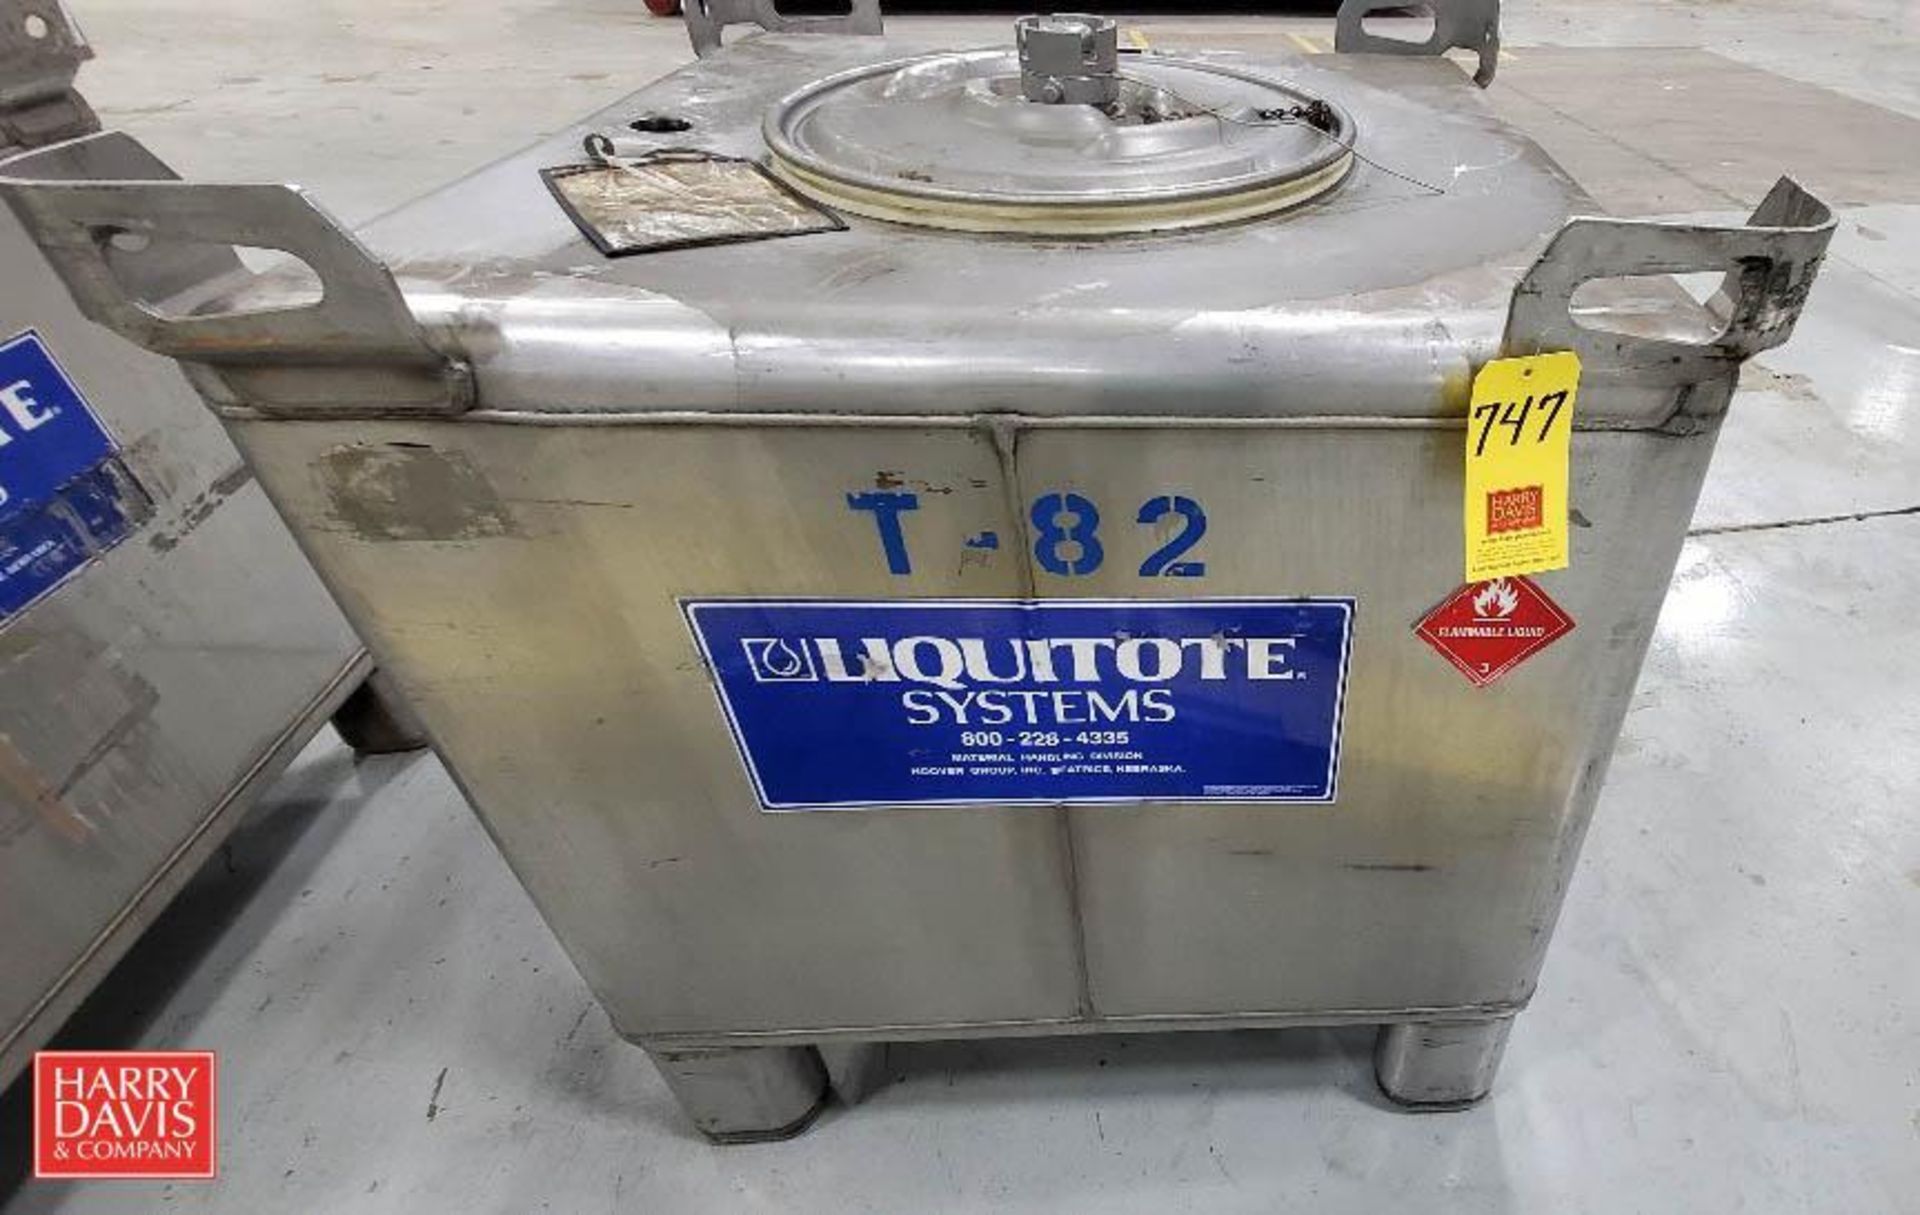 S/S Liquid Tote 255 Gallon Capacity with Valve, S/N: 75763 - Rigging Fee: $75